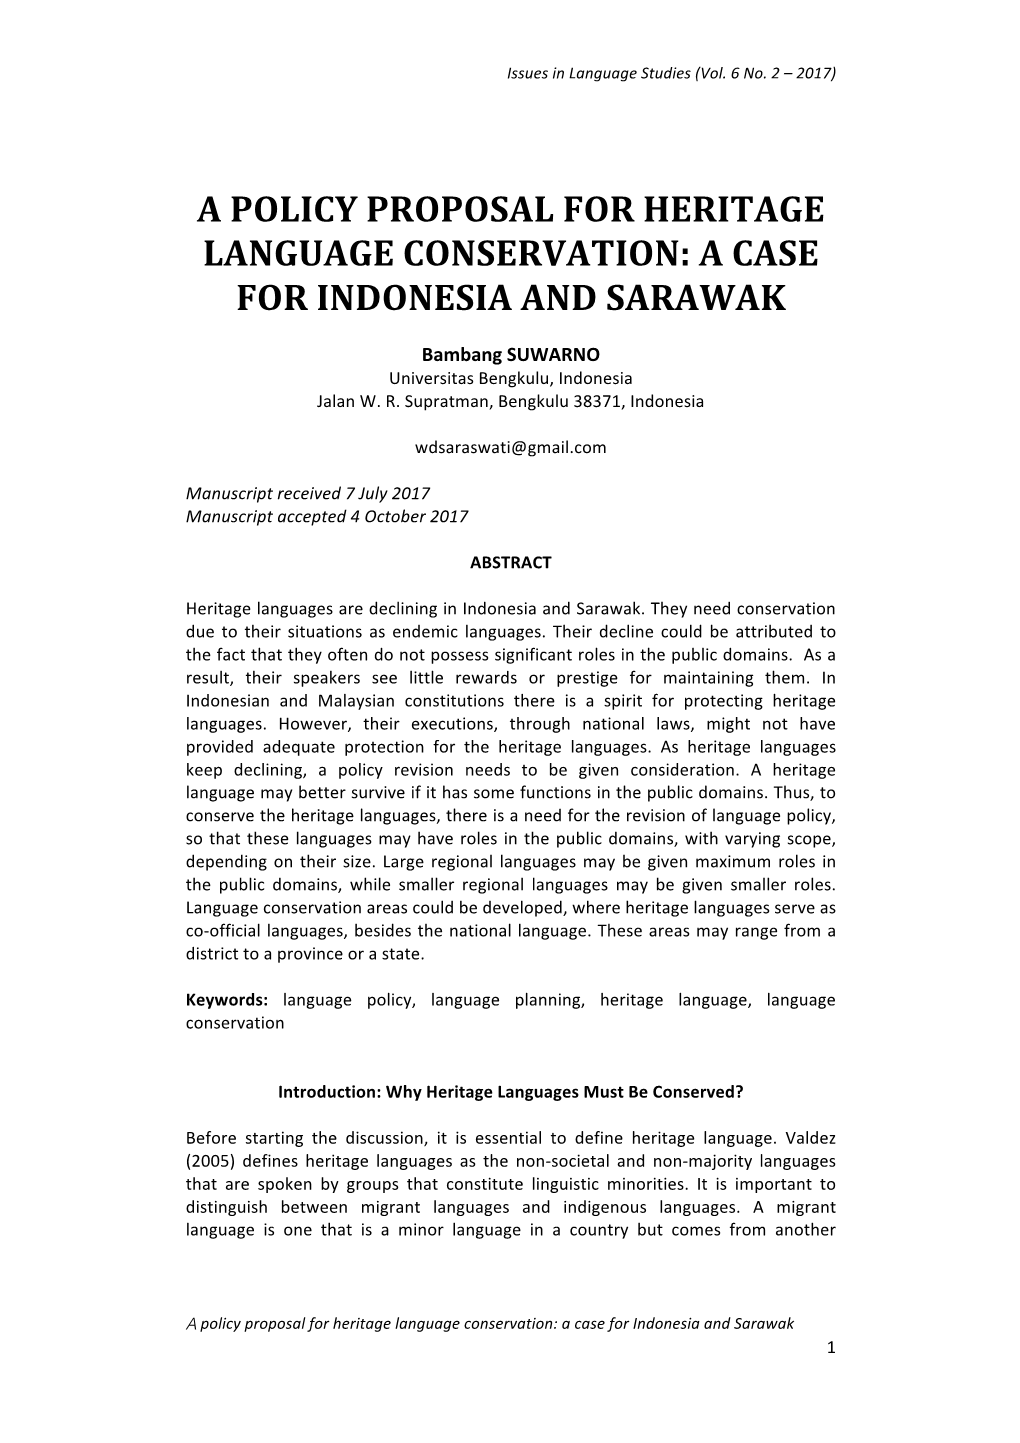 A Policy Proposal for Heritage Language Conservation: a Case for Indonesia and Sarawak